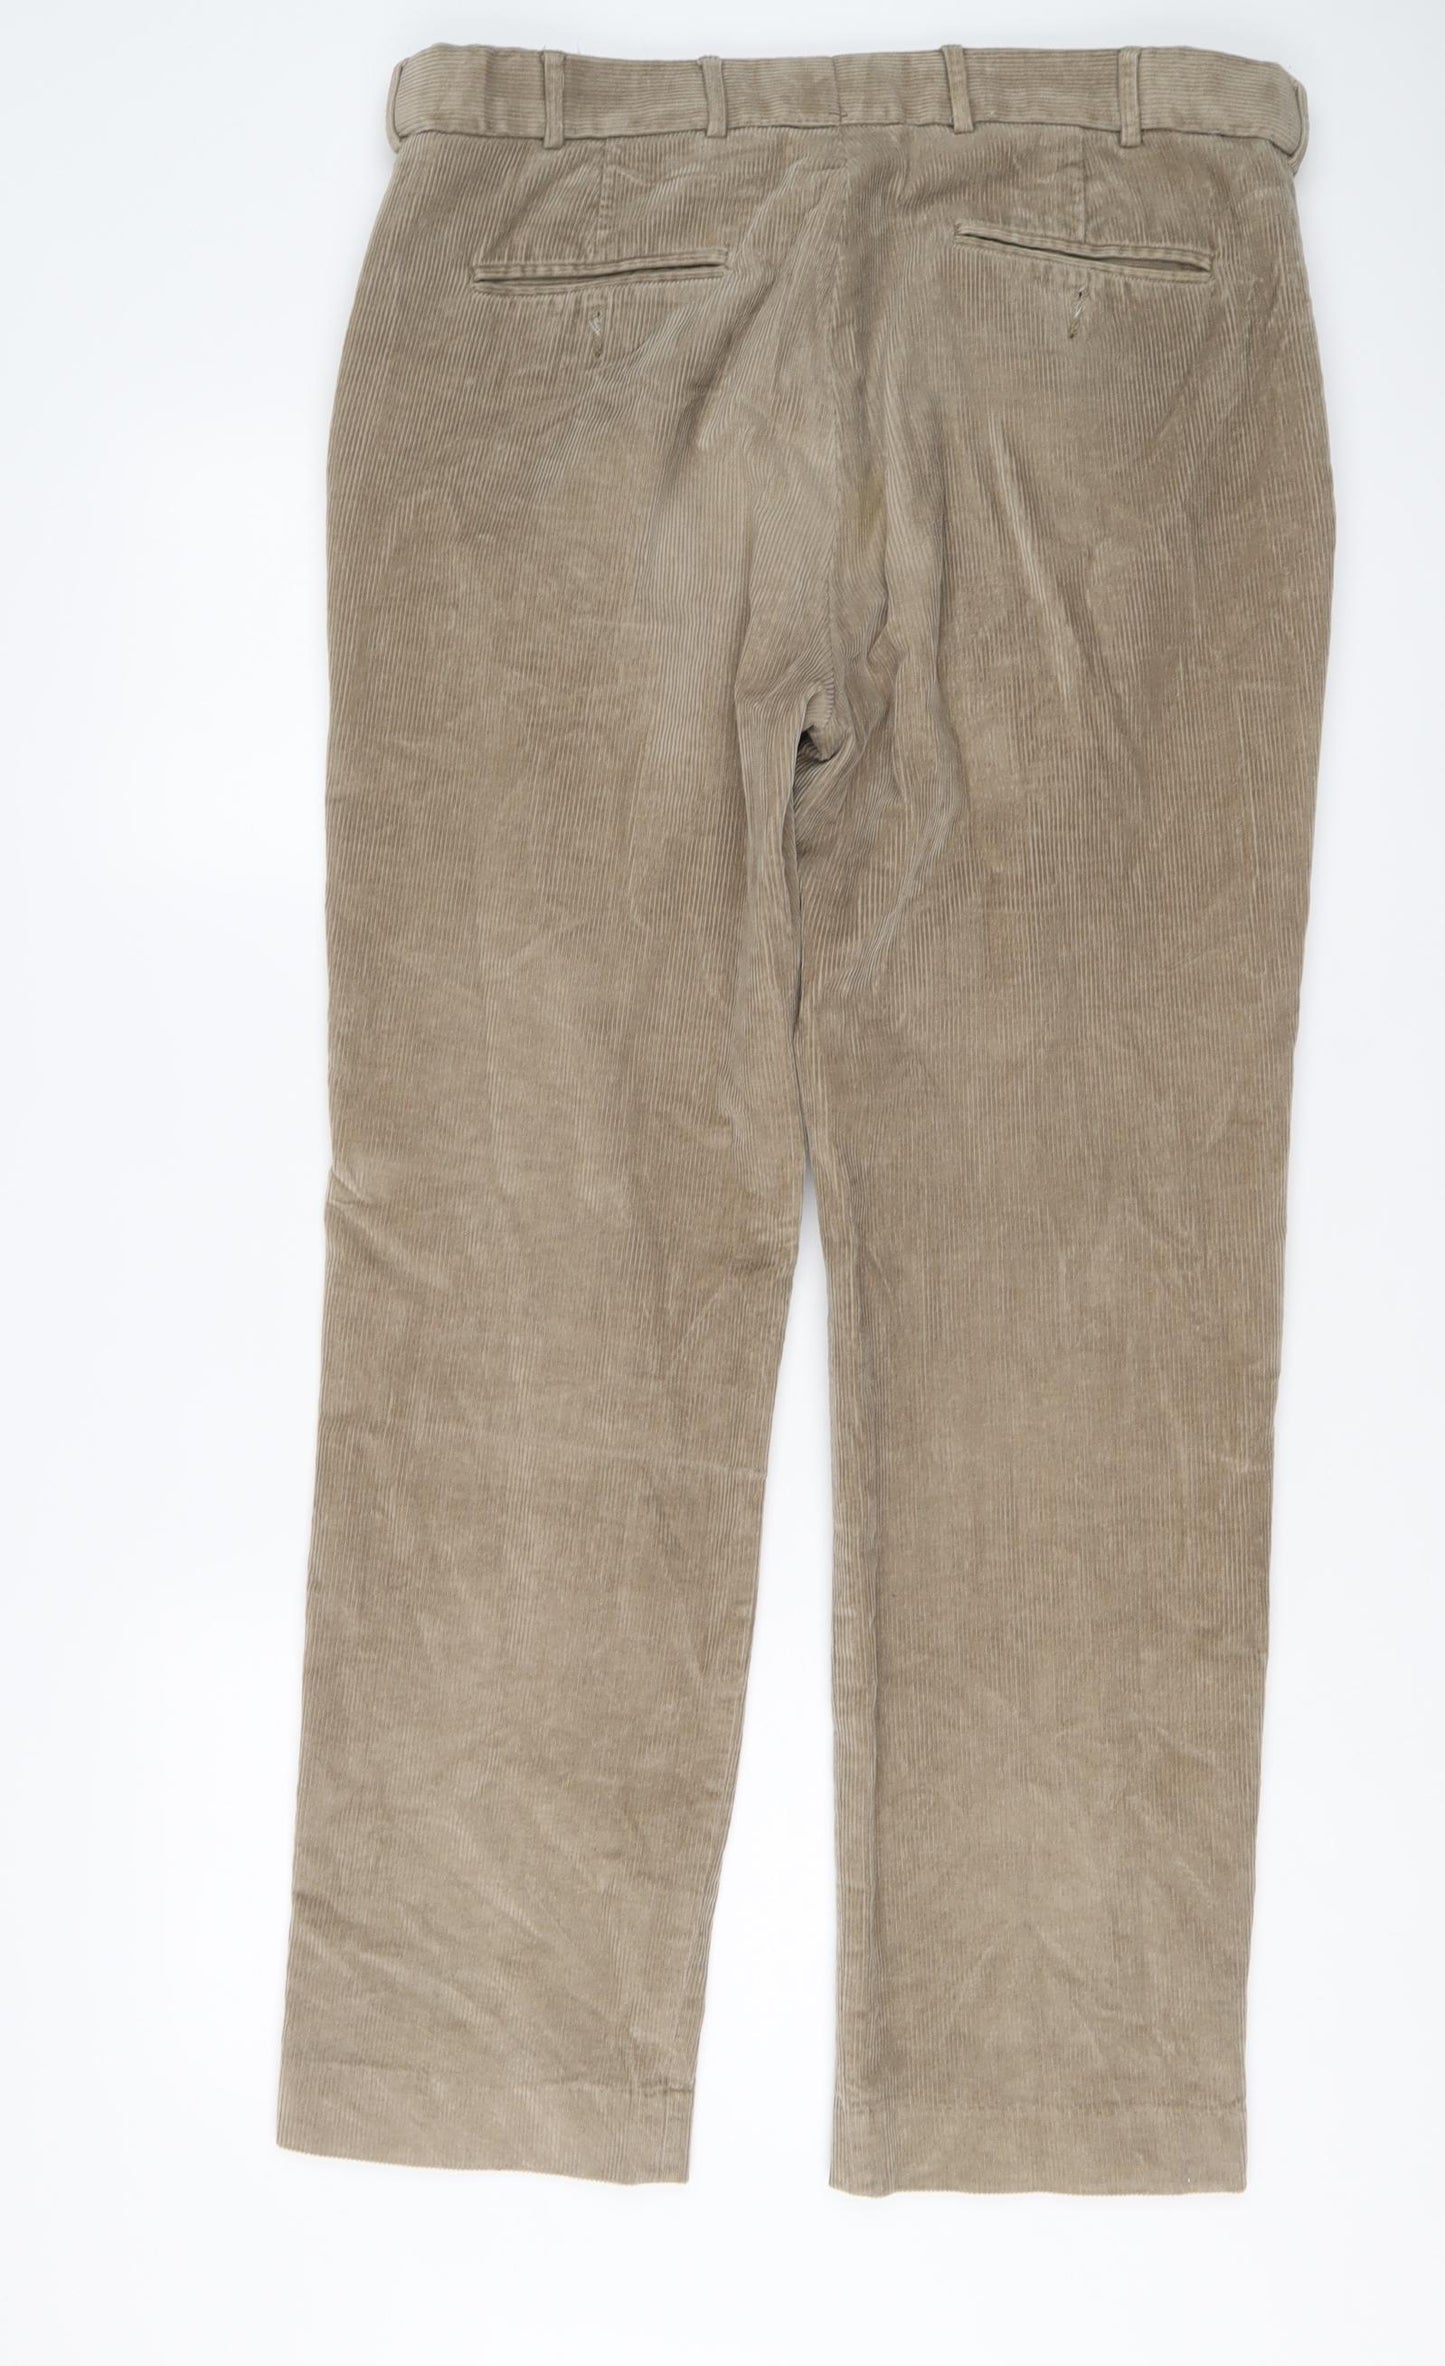 Cotton Traders Mens Beige Cotton Chino Trousers Size 38 in L31 in Regular Button